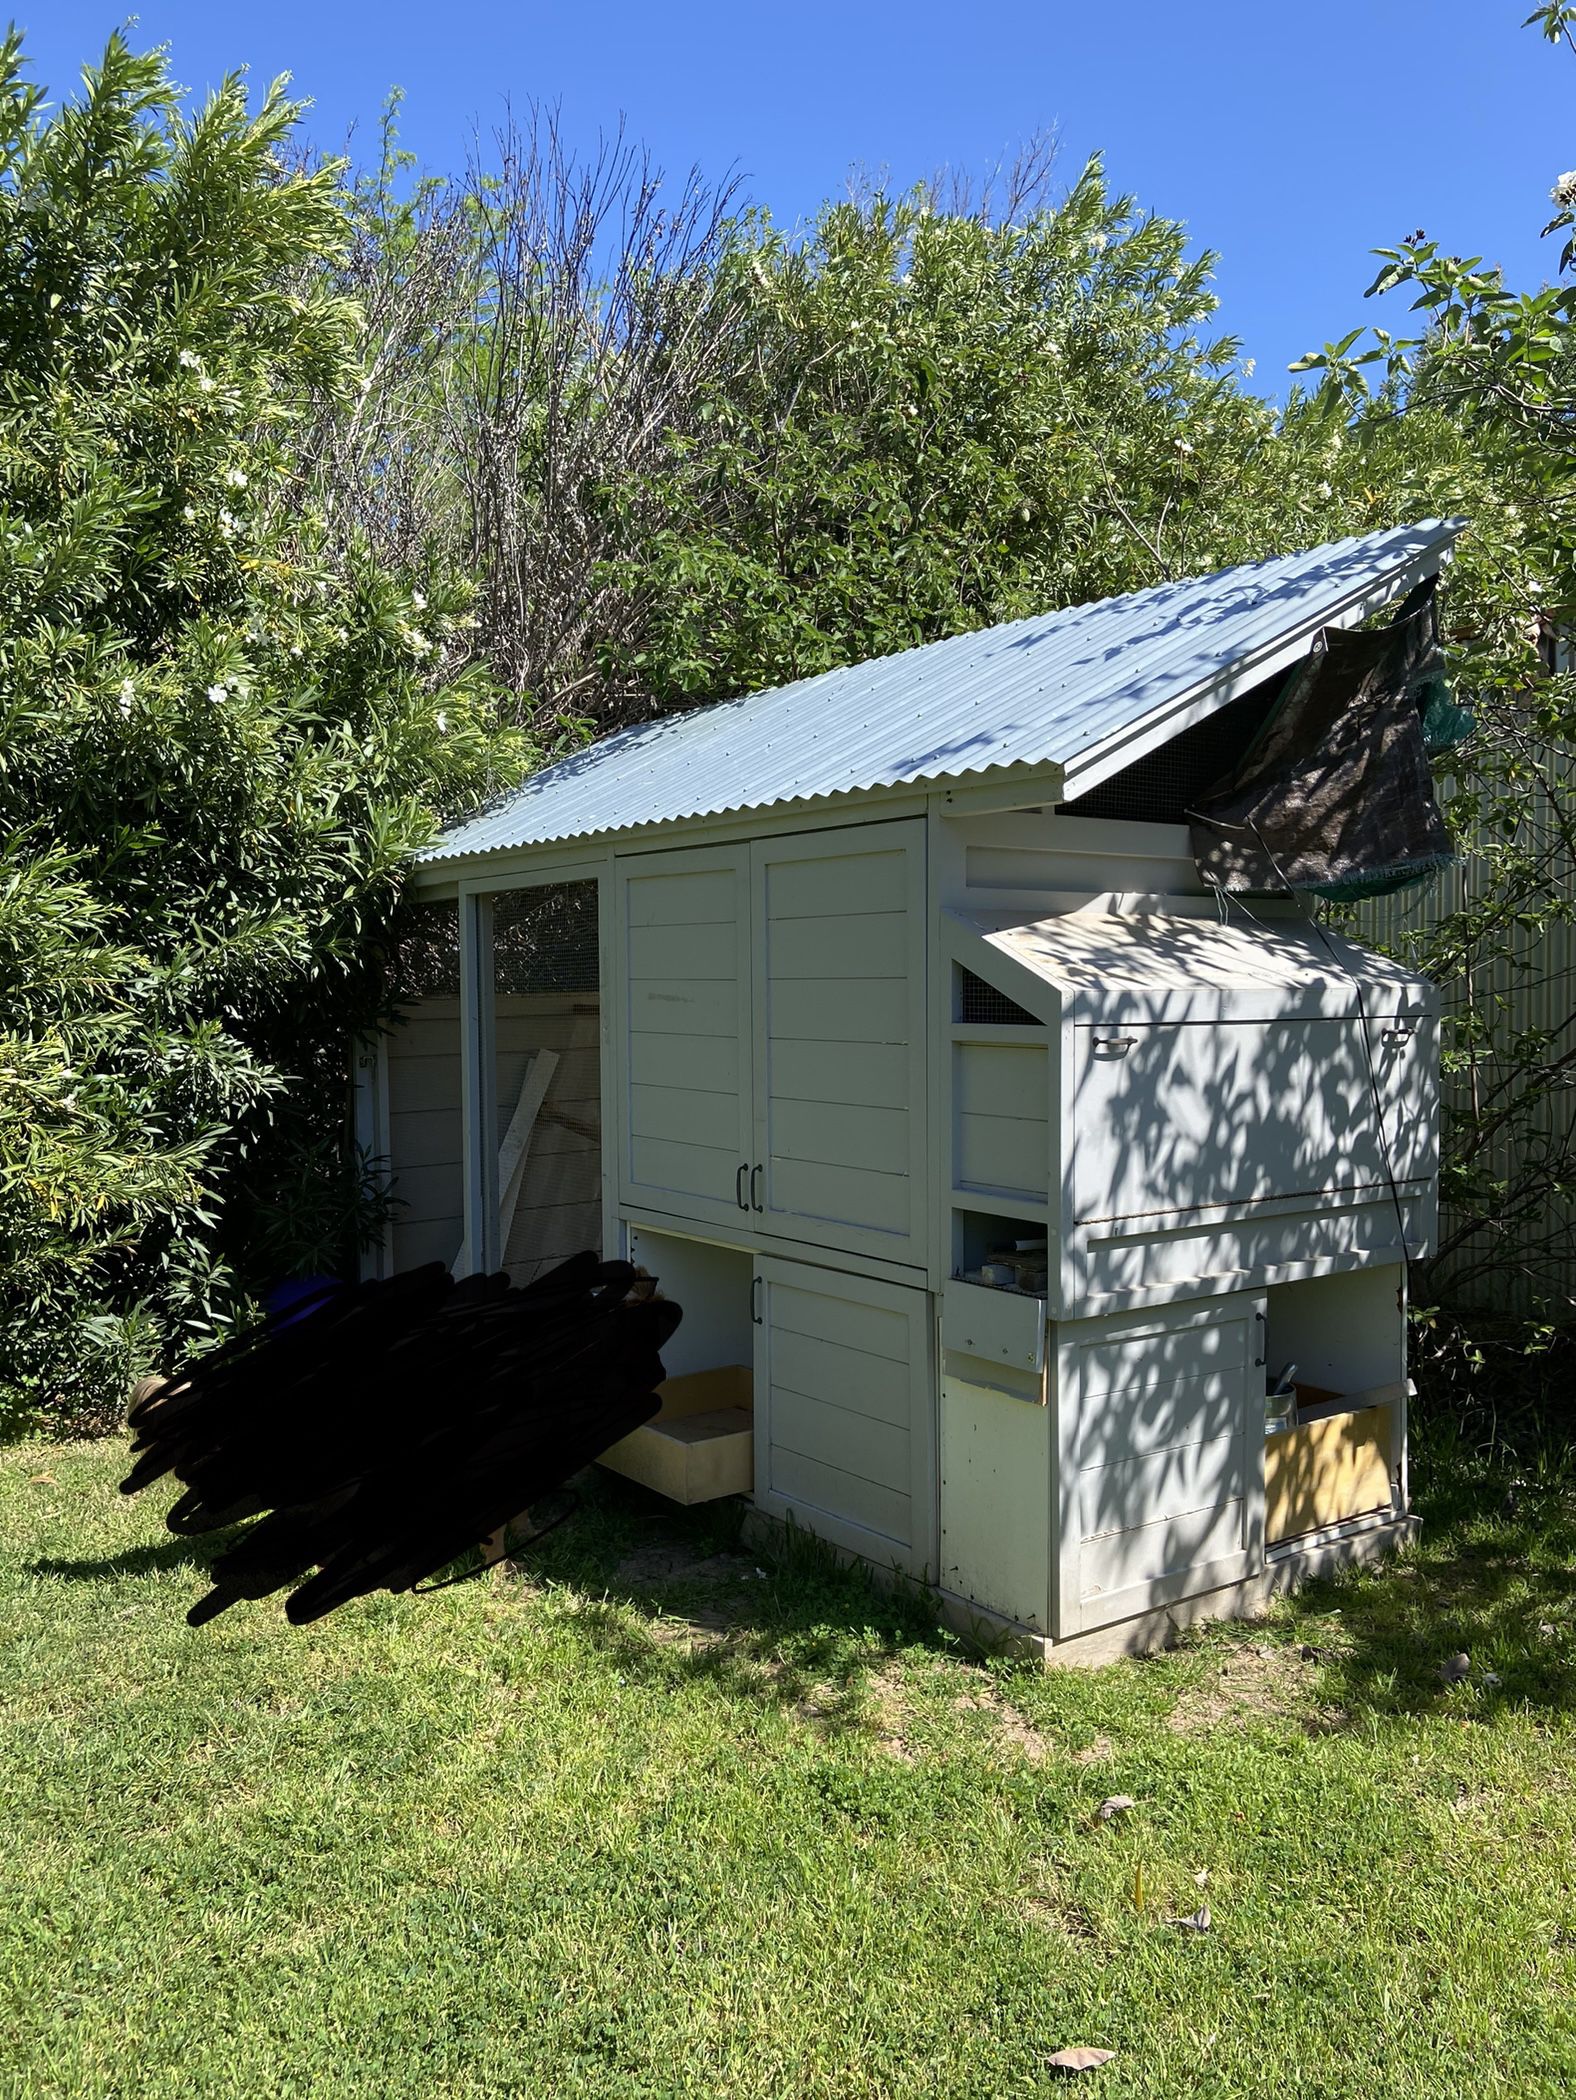 Pending Sale- Chicken Coop- Reposted Without Dog In Photo!